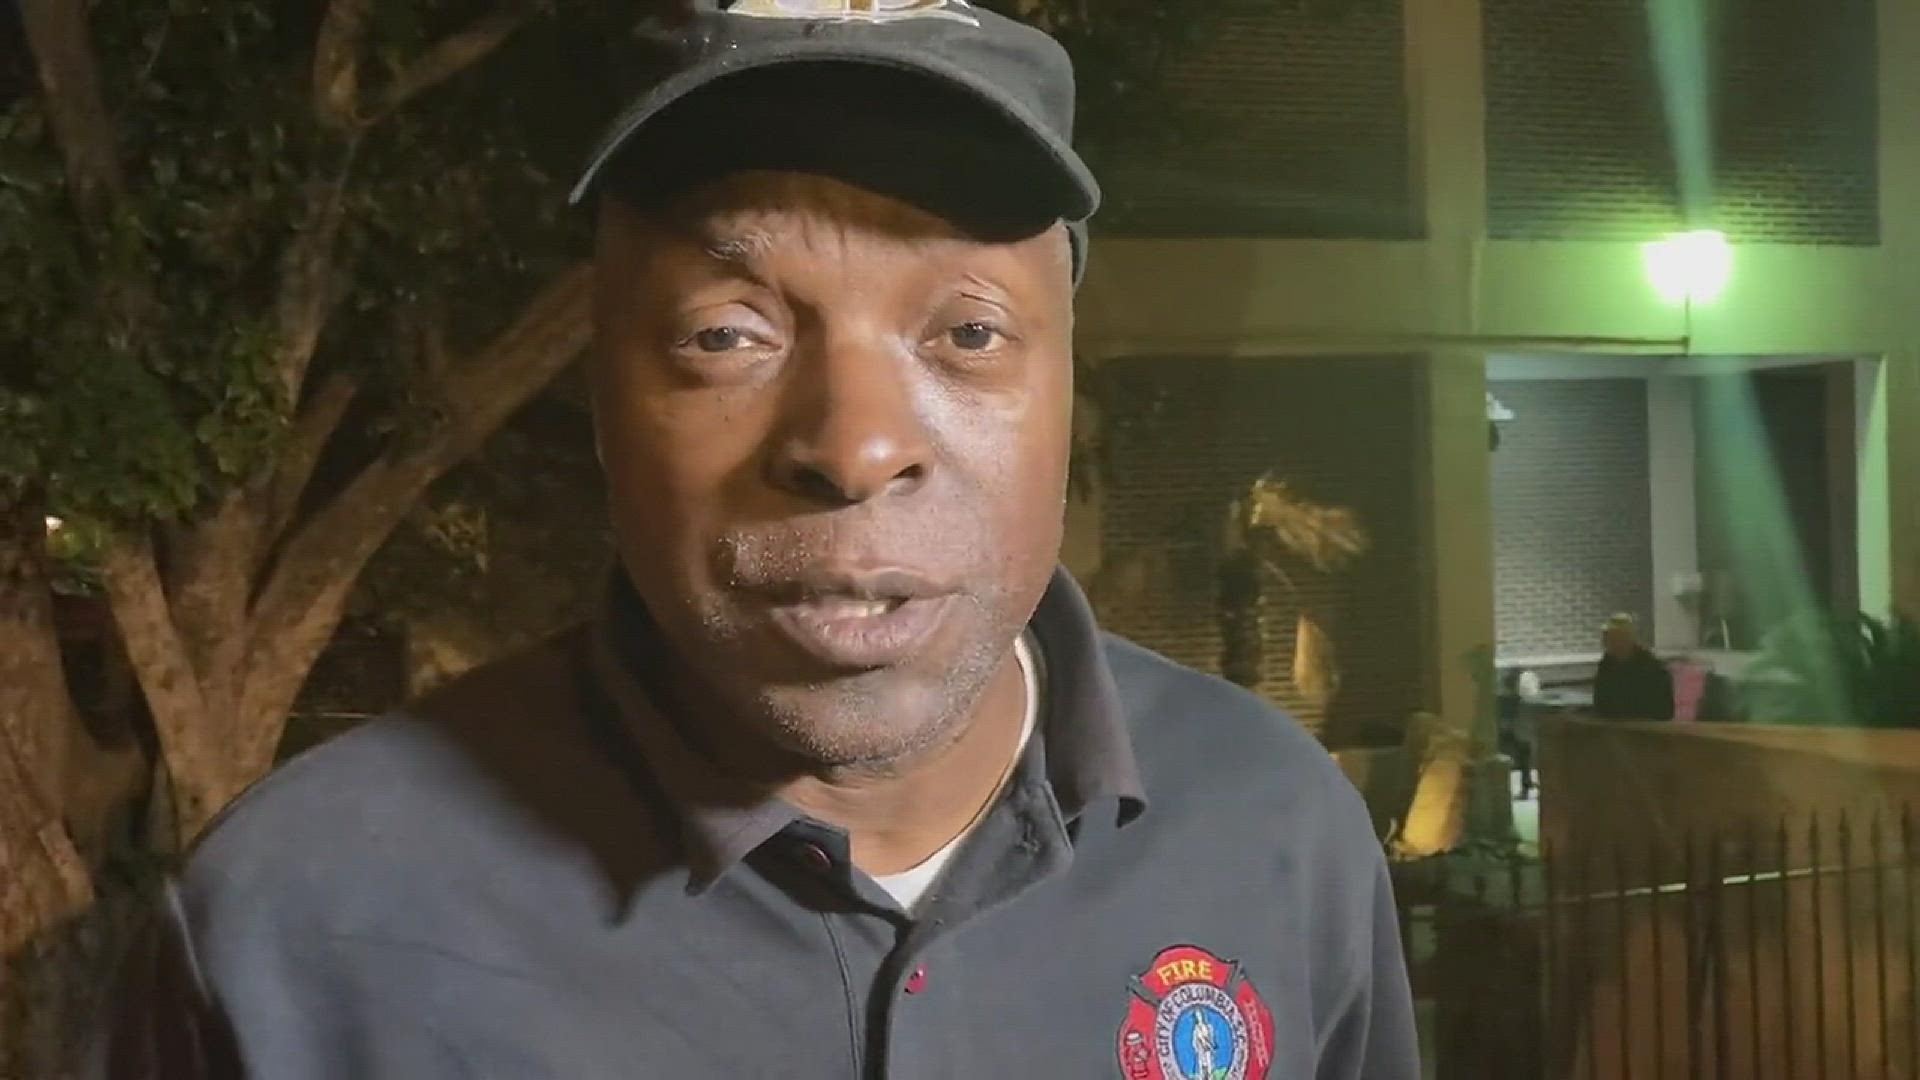 Columbia-Richland Fire Chief Aubrey Jenkins said that, while a sprinkler system helped contain a small fire, it also caused damage that has impacted 60+ residents.